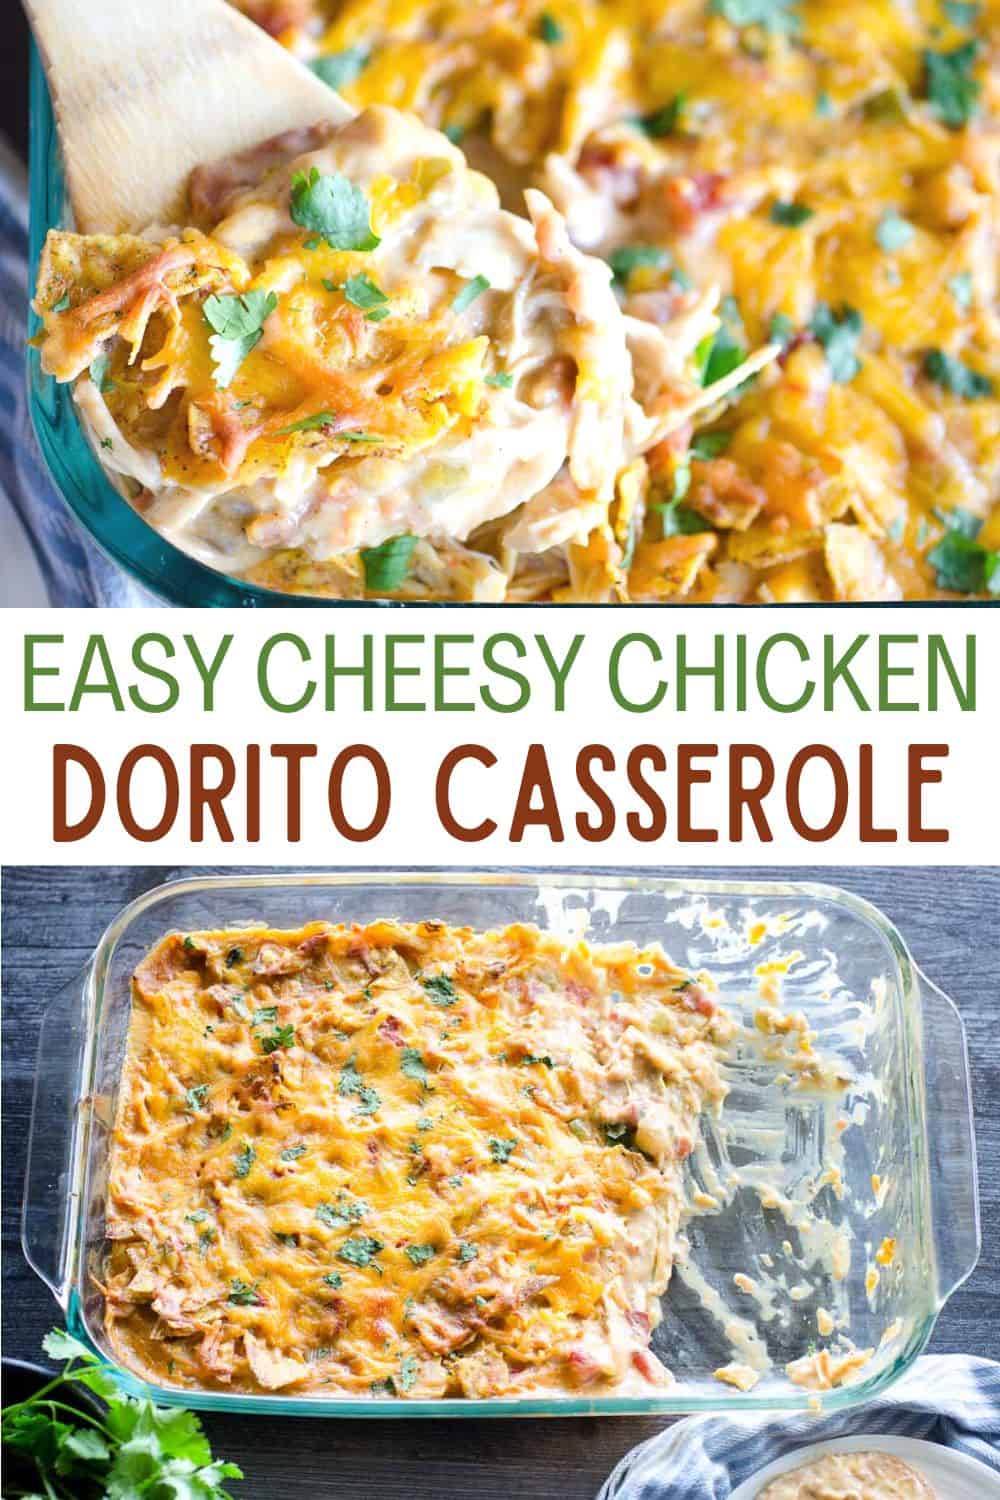 This Dorito casserole includes layers of cheesy chicken, Rotel, and crunchy Dorito chips baked in a casserole for a delicious and easy weeknight dinner!